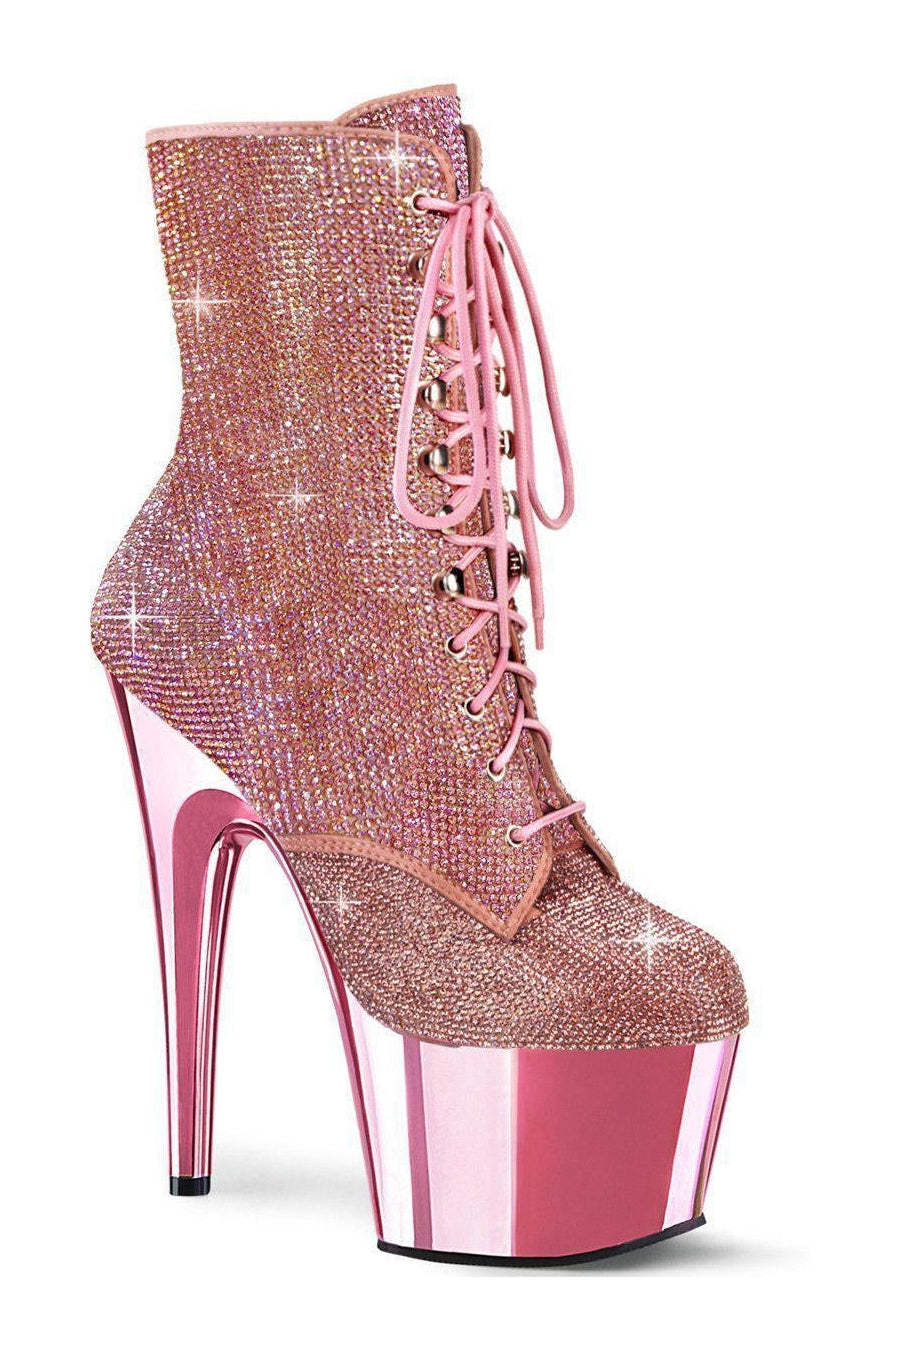 Pleaser Pink Ankle Boots Platform Stripper Shoes | Buy at Sexyshoes.com